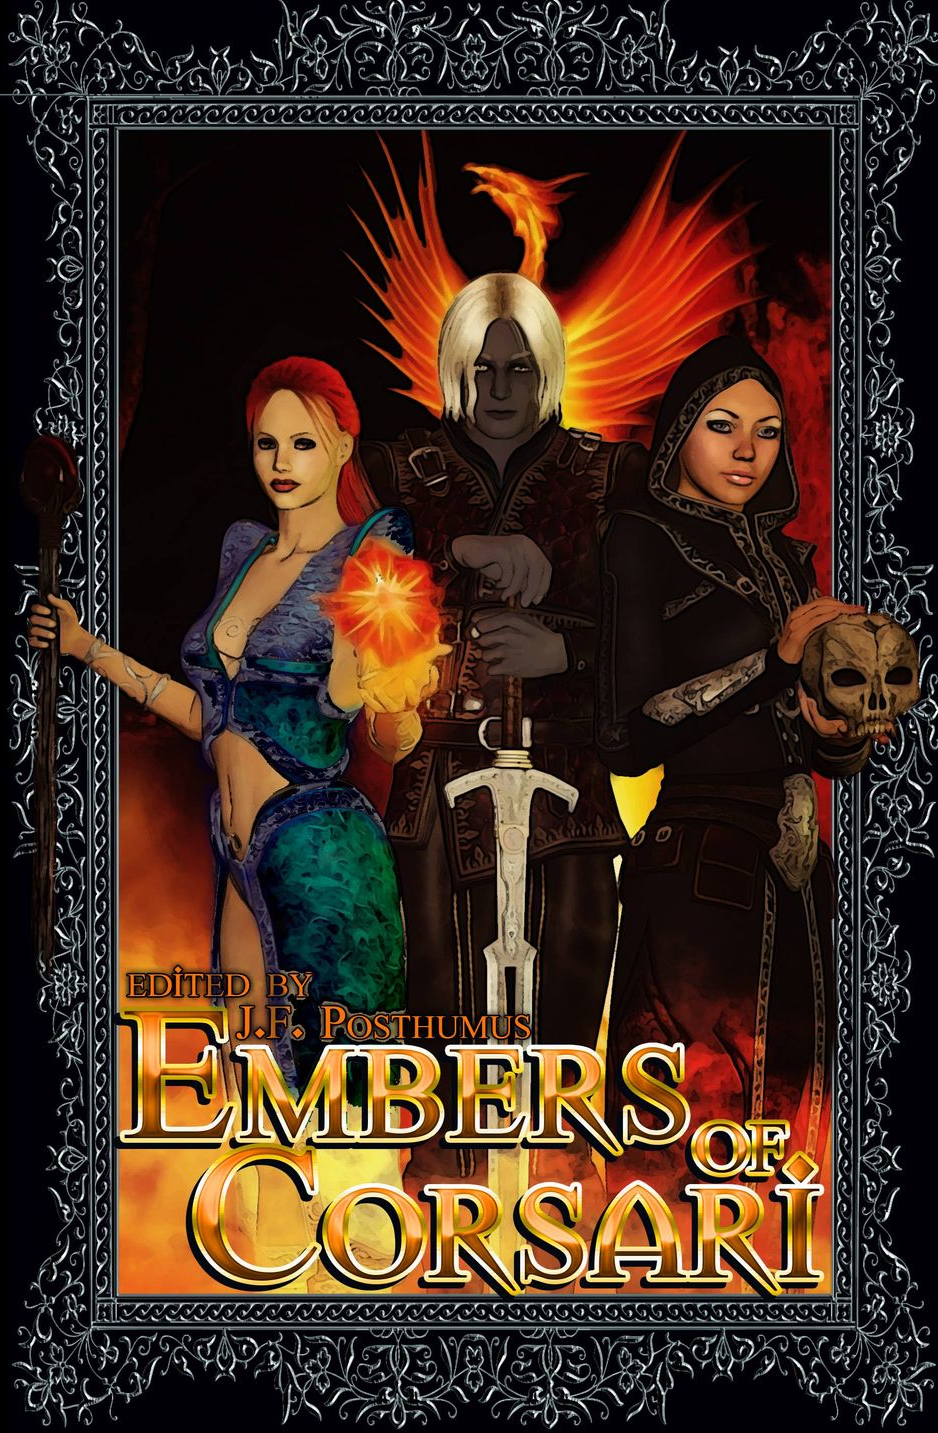 Open Call for short story submissions! “Embers of Corsari”.  An anthology set in A new shared High Fantasy setting.